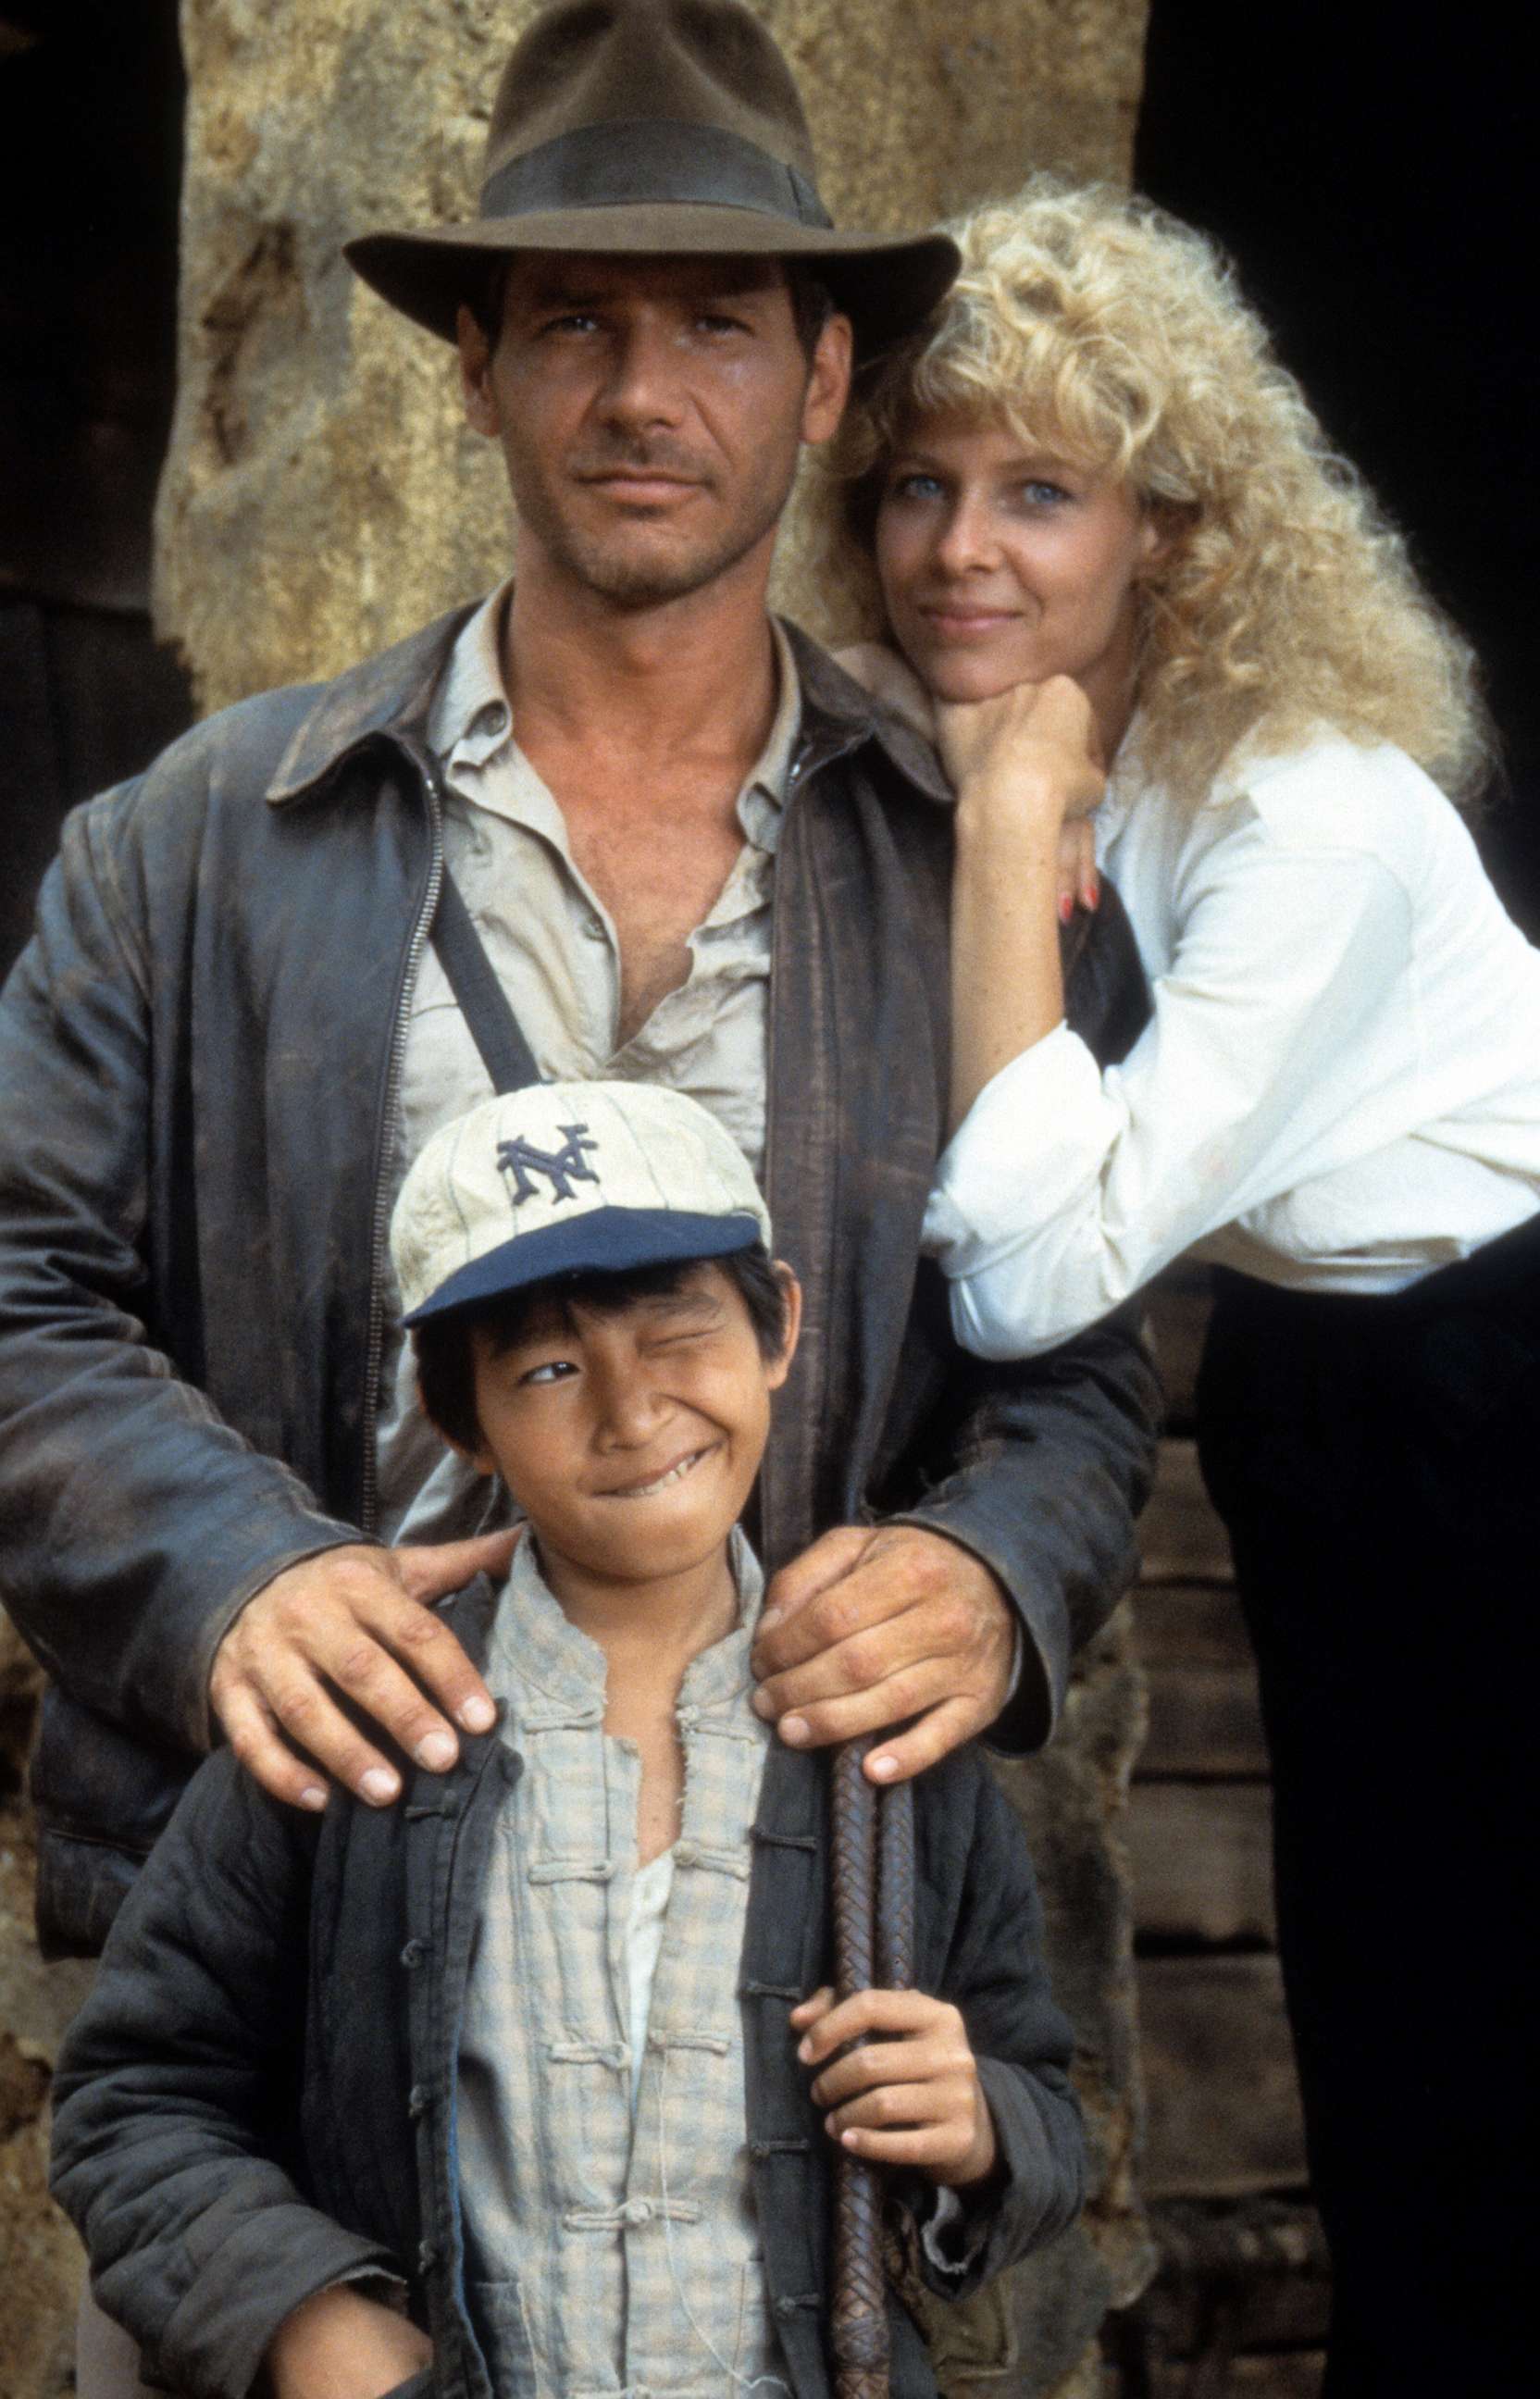 PHOTO: Harrison Ford, Jonathan Ke Quan and Kate Capshaw on set of the film "Indiana Jones And The Temple Of Doom" in 1984.